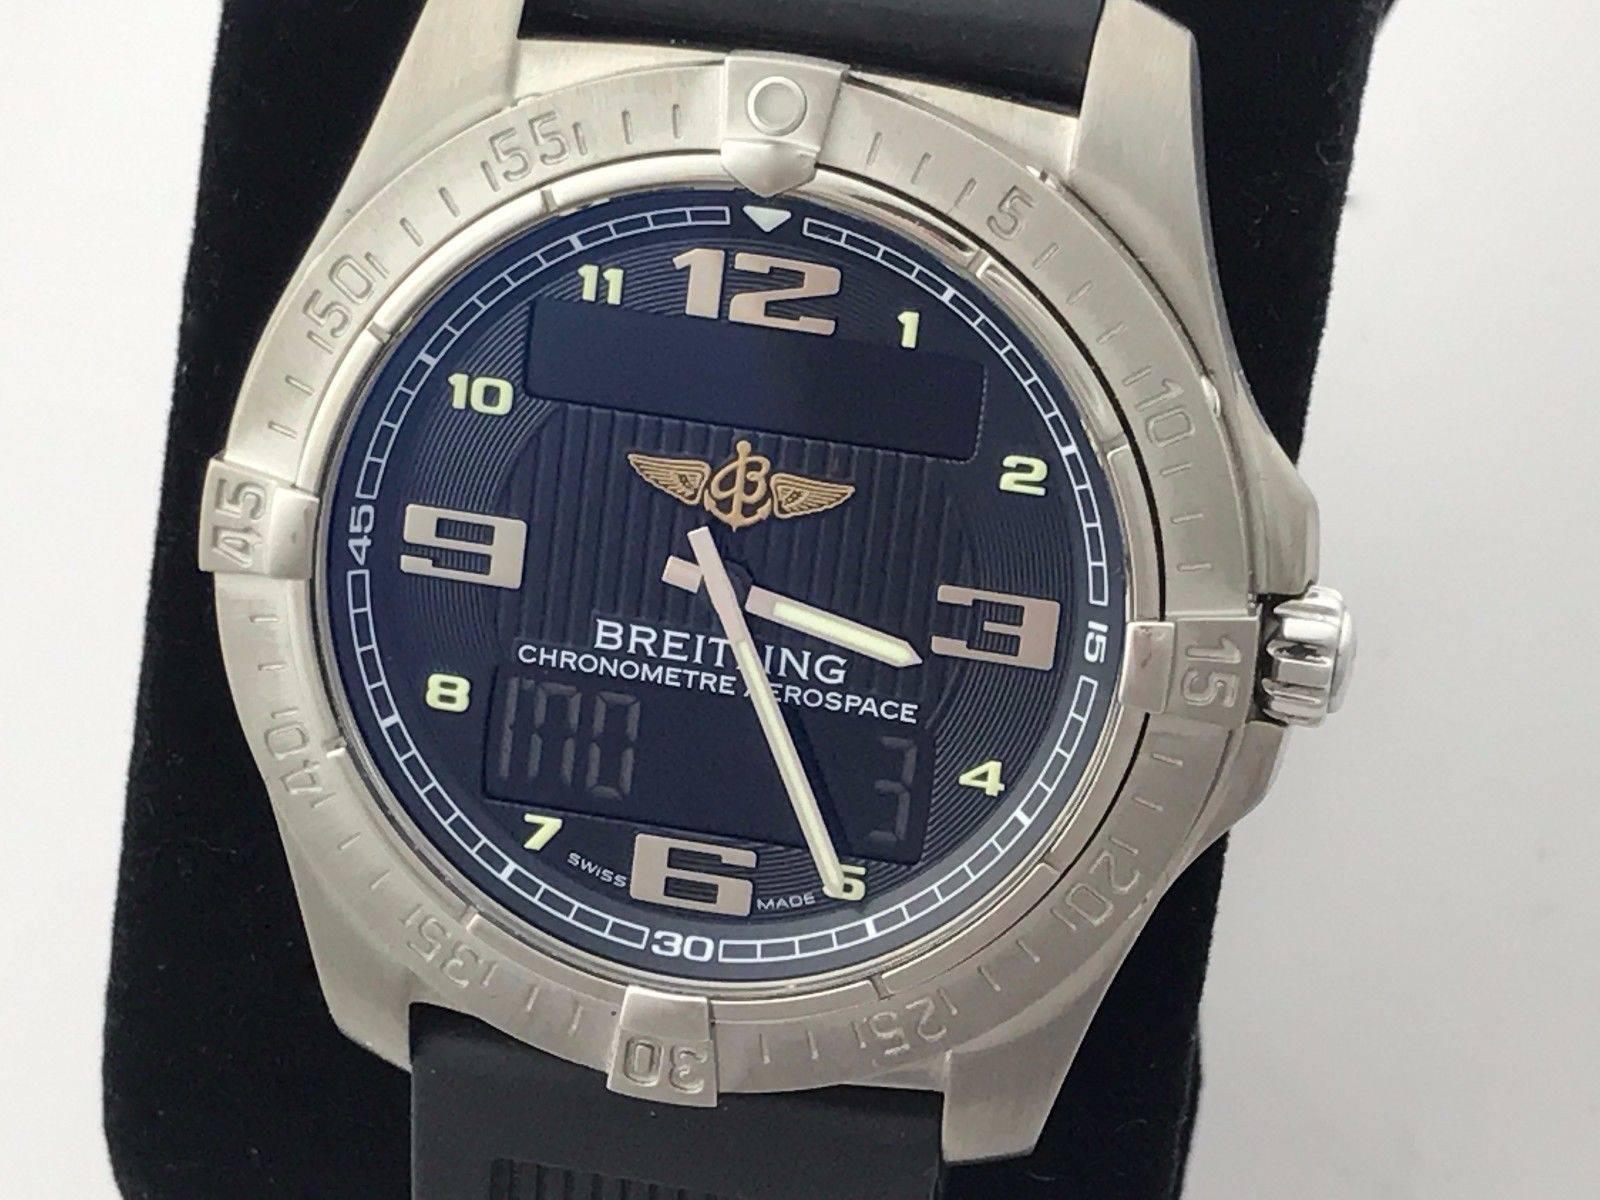 Breitling Aerospace Evo Men's Quartz wrist watch. Model E7936210/BC27-1PRO3T. Certified pre-owned and ready to ship! Chronograph, Alarm, Countdown Timer, GMT - 2nd Time Zone, Digital Display. Black Dial with polished Arabic numerals and Digital